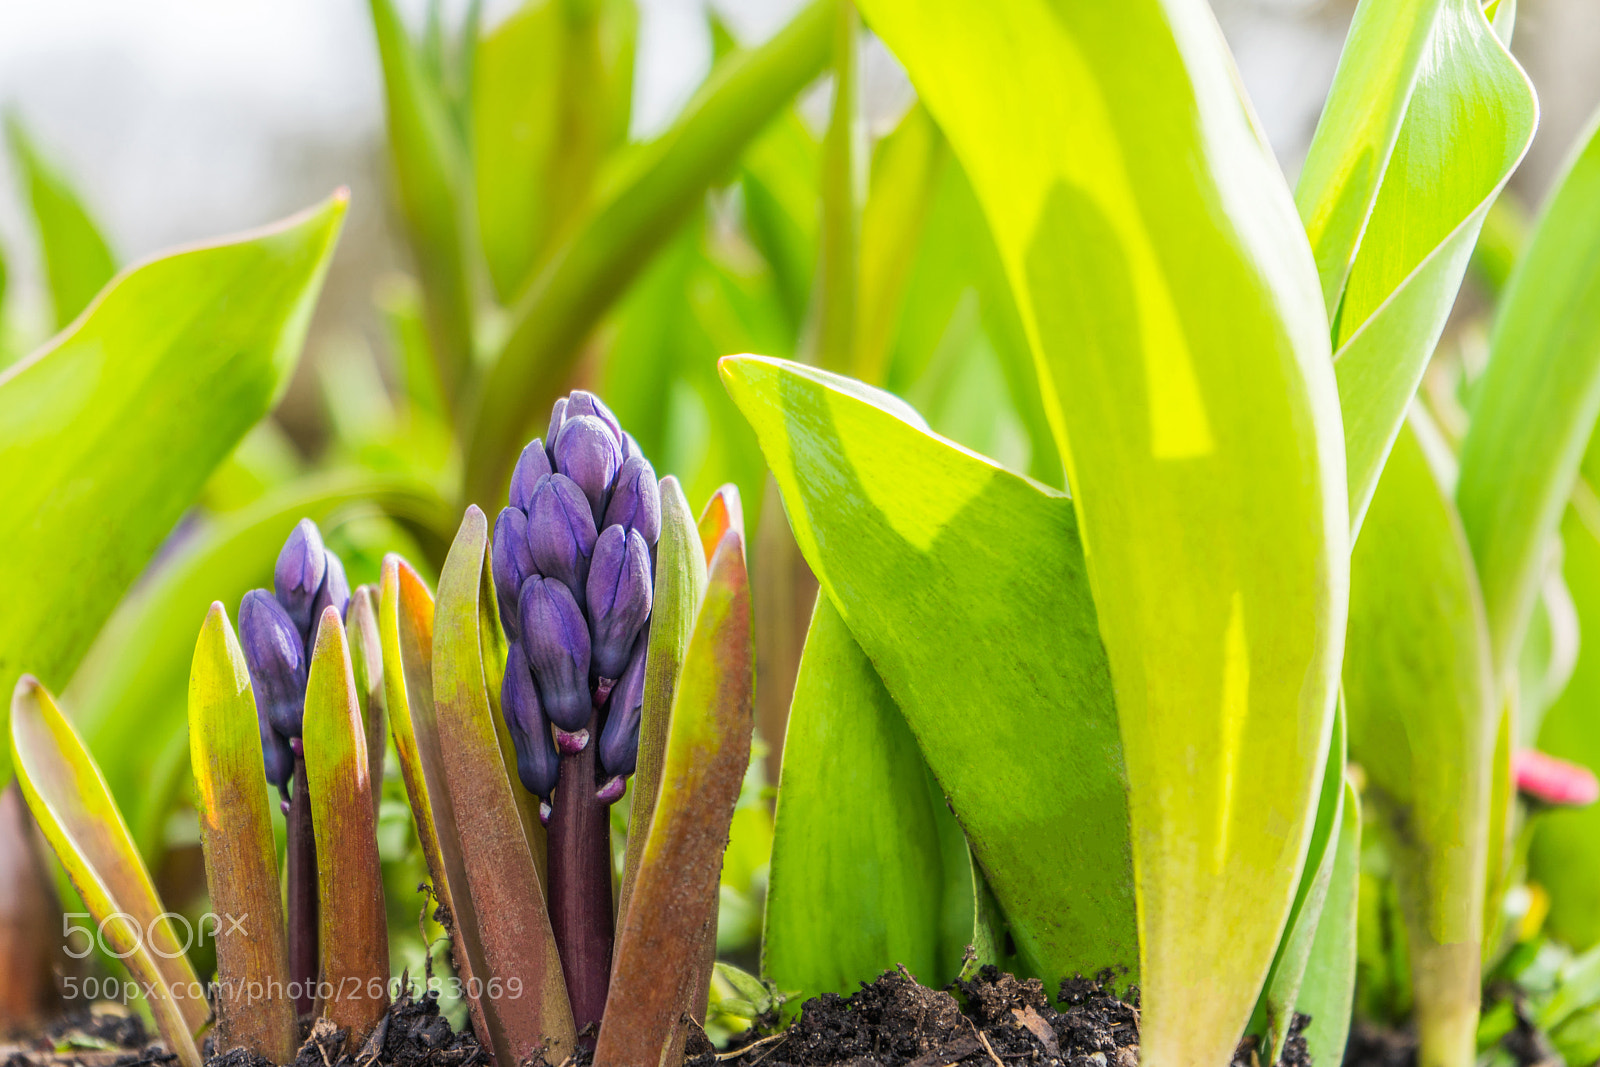 Sony a7 sample photo. Two beatiful violet hyacinth photography